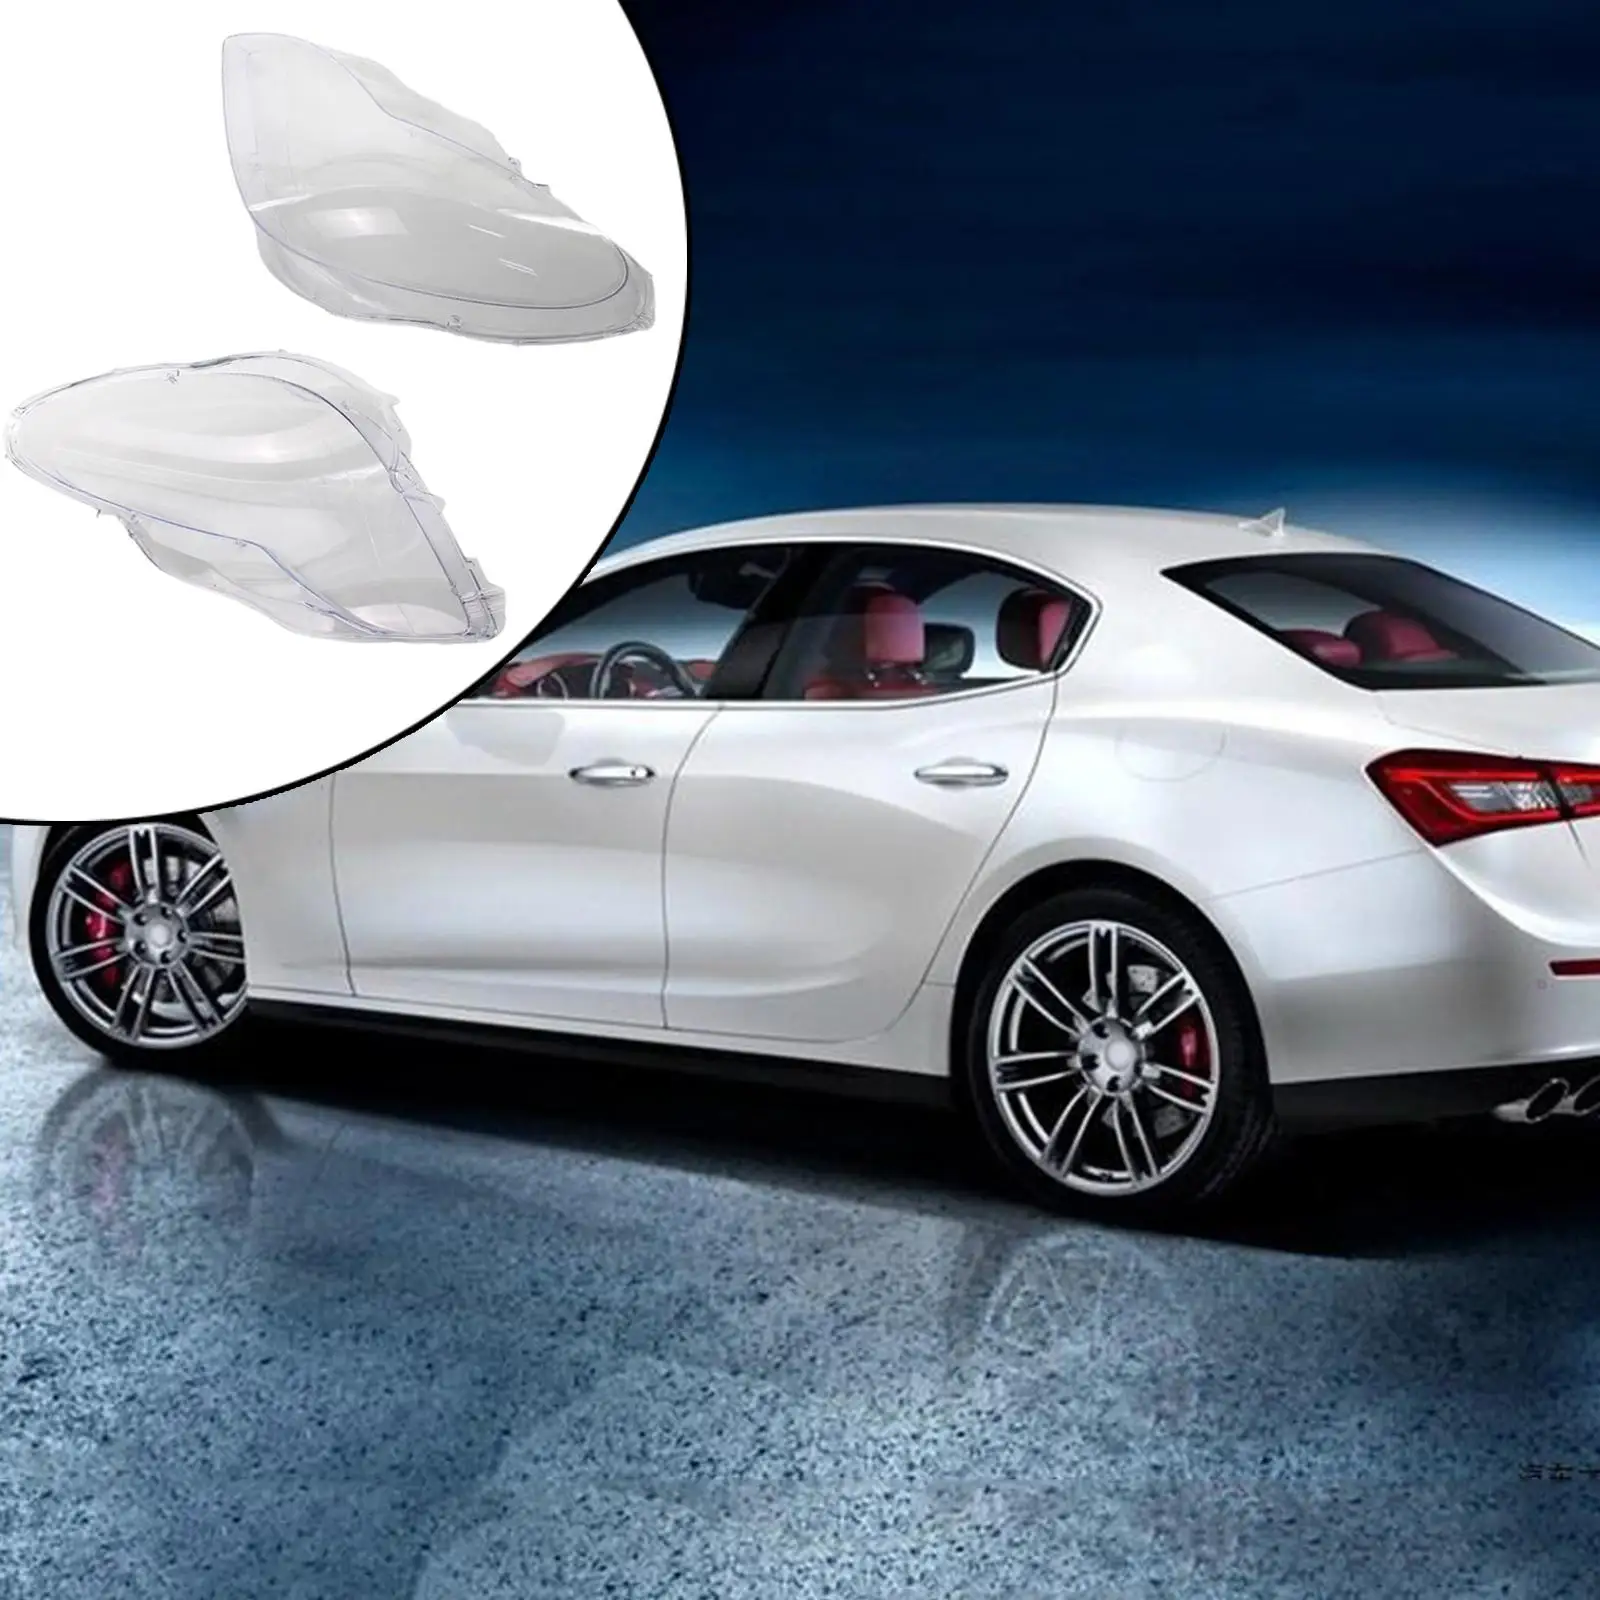 Car Front Headlight Headlamp Lens Cover for Mercedes W219 CLS350 CLS500 A2198203061